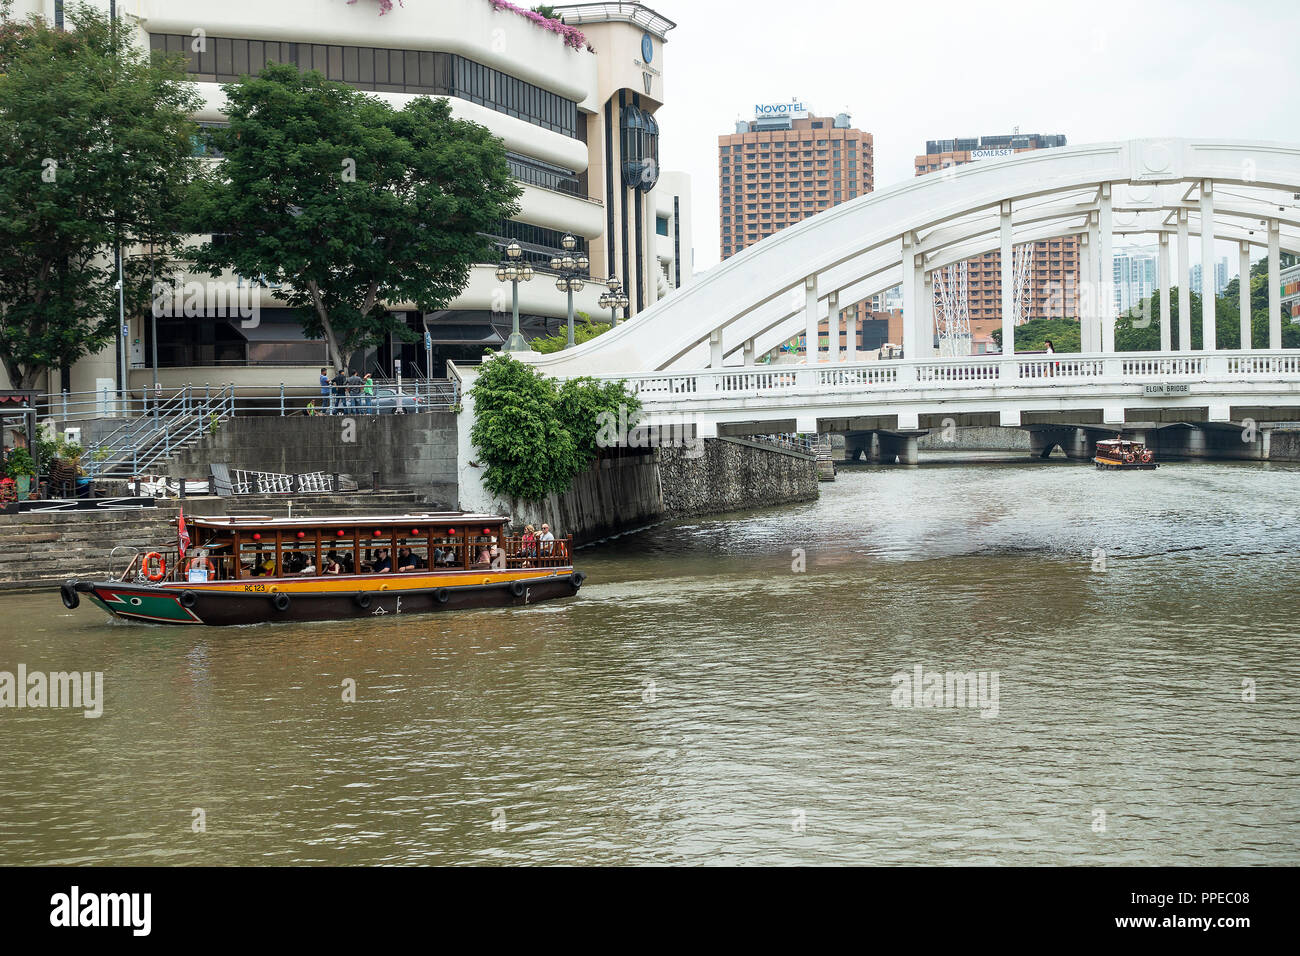 The Elgin Bridge River Crossing with Tourist Taxi Boat on the Singapore River with the Riverwalk Condominium Building in Singapore Asia Stock Photo